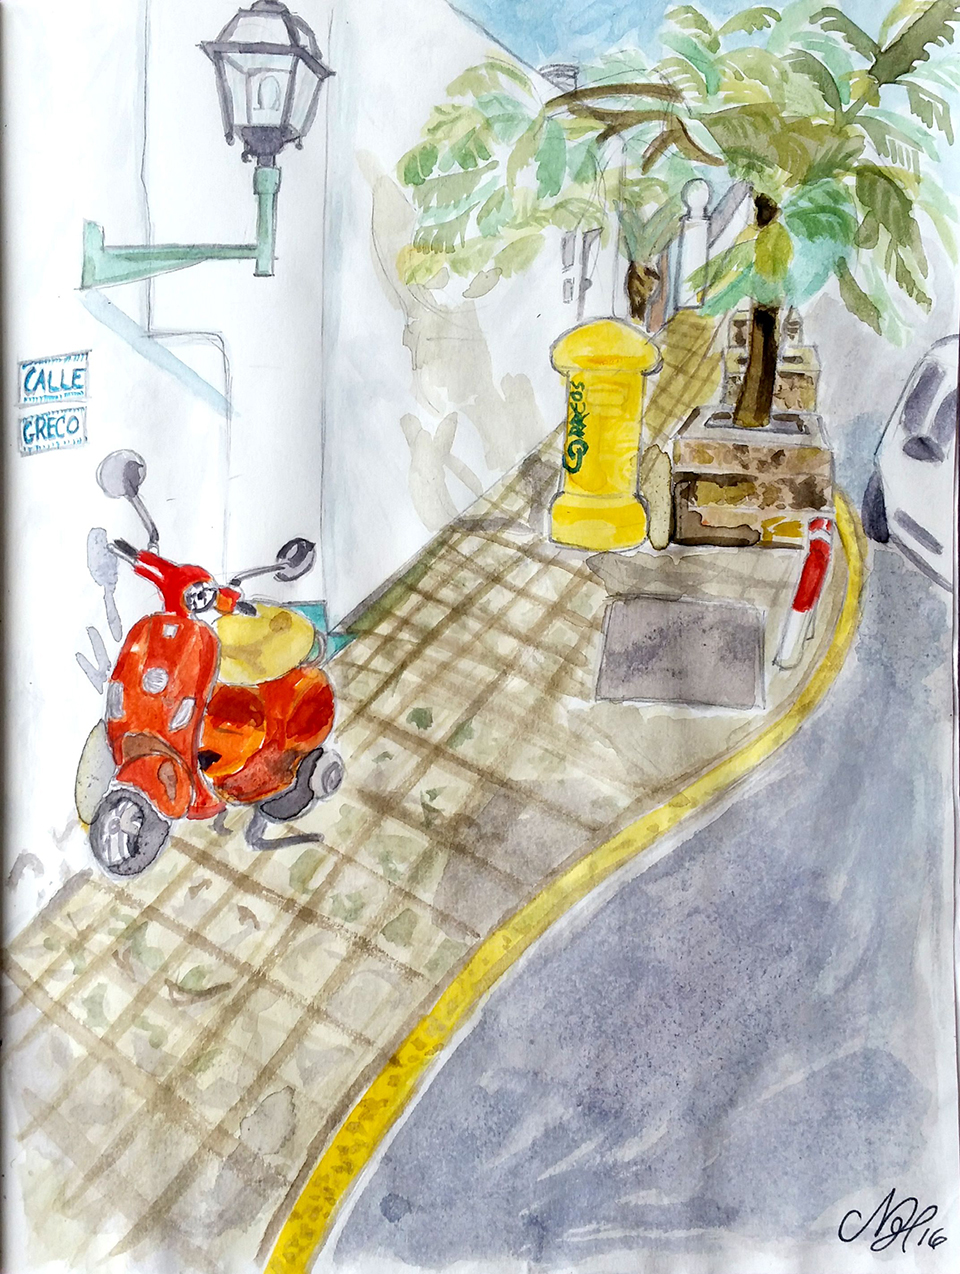 Calle Greco, aquarell on paper - from a street in Gran Canaria